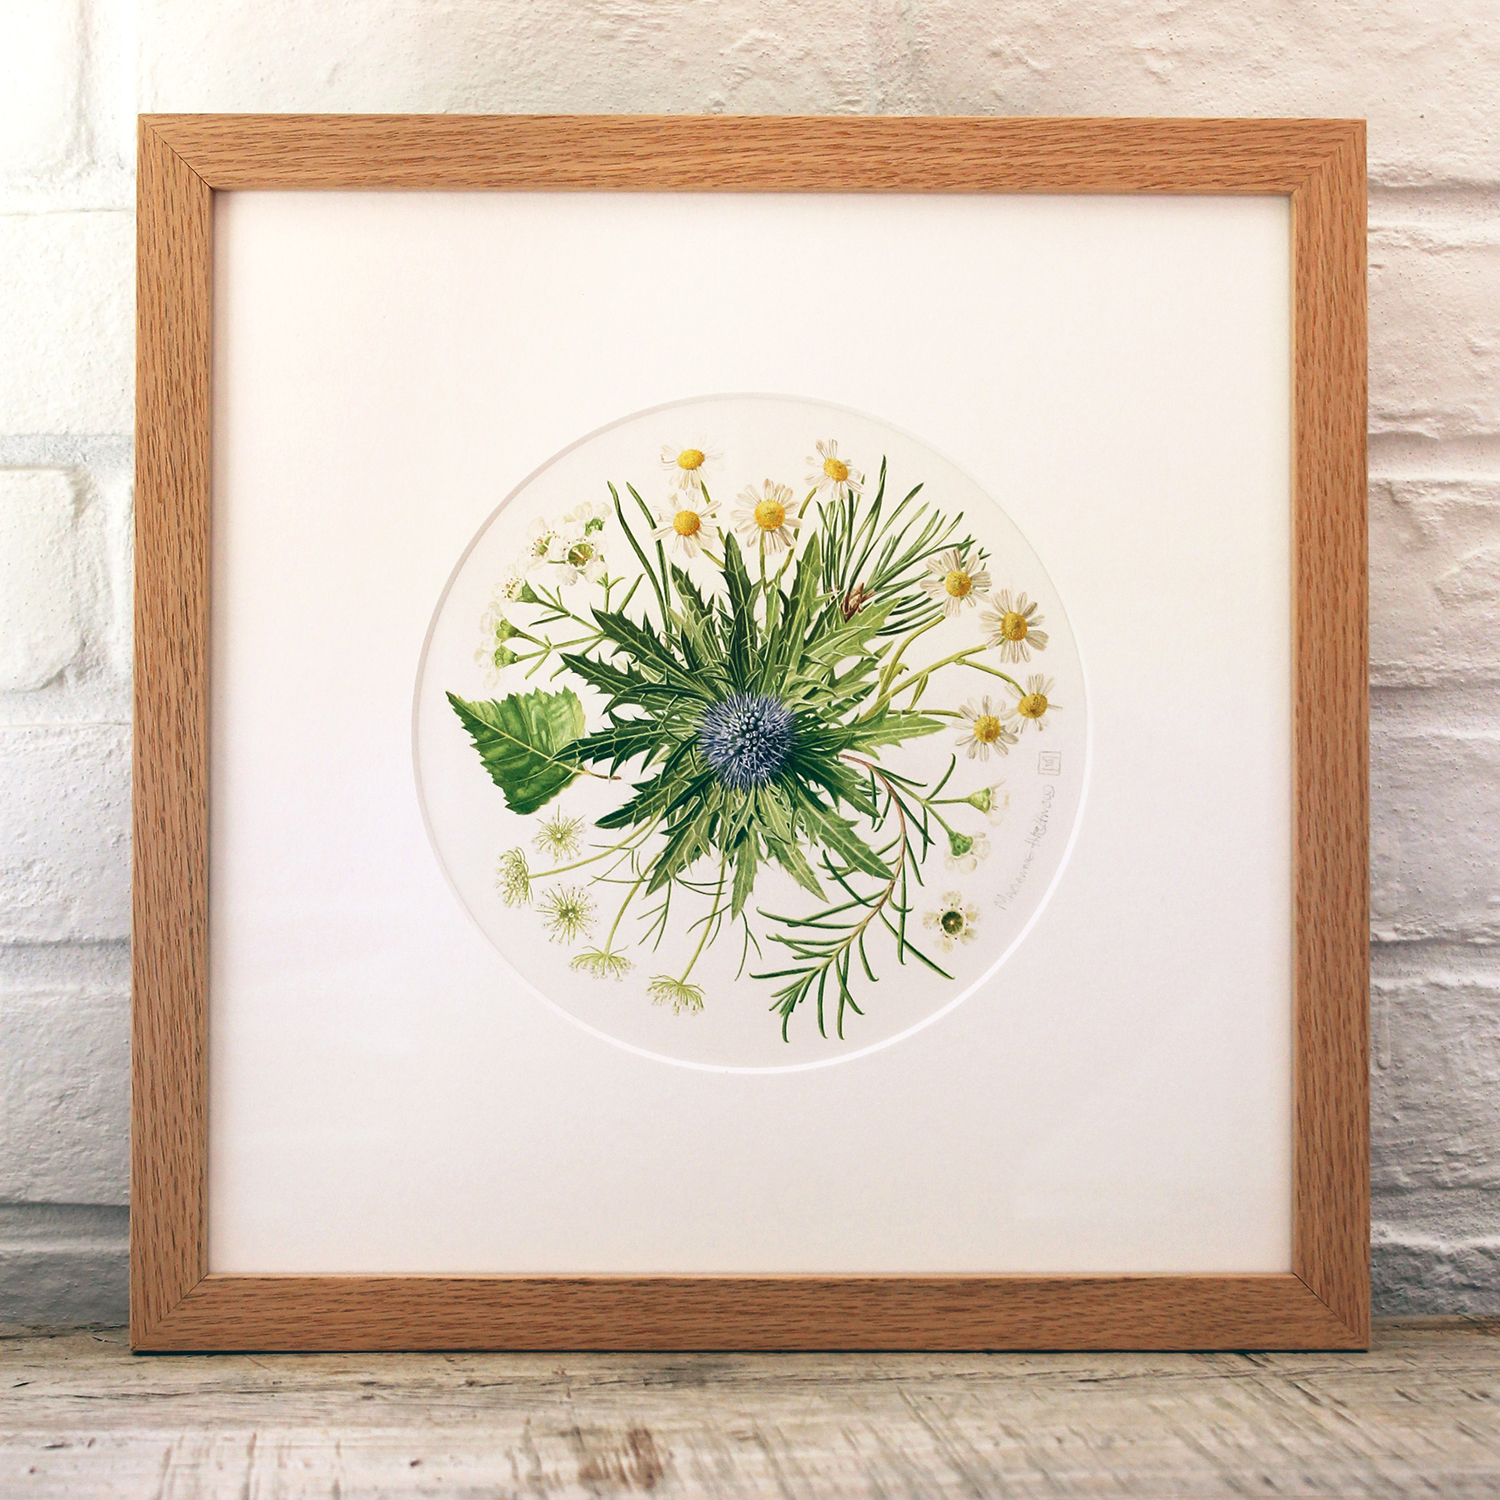 Bouquet - a framed watercolour painting, a commission based on a bridal bouquet, featuring daisies, wax flower, eryngium, pine, birch and ami by Marianne Hazlewood